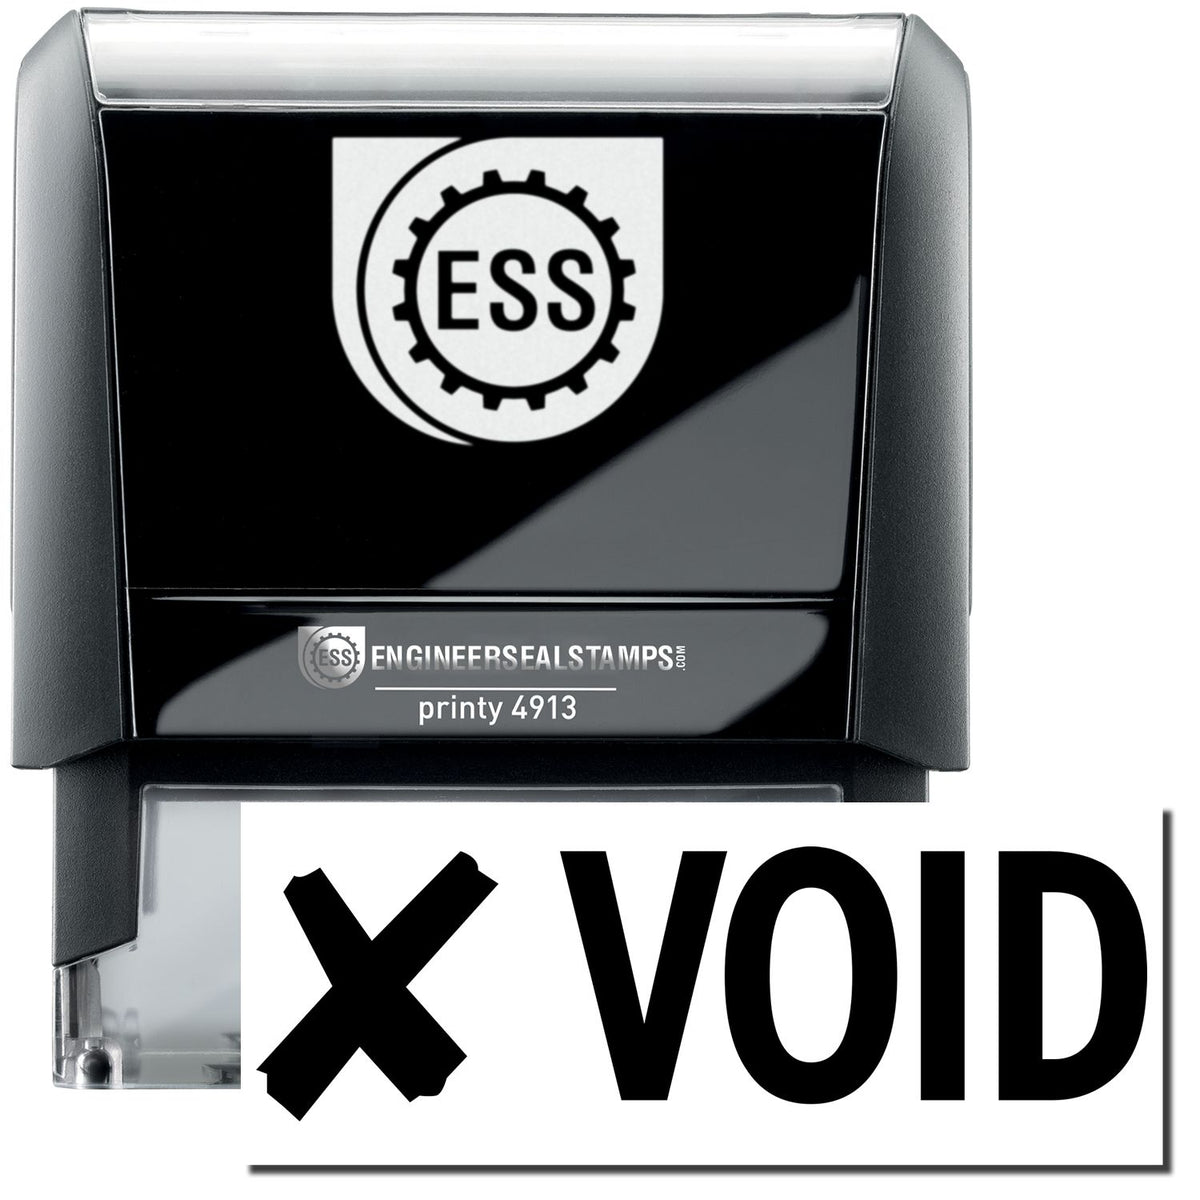 A self-inking stamp with a stamped image showing how the text &quot;VOID&quot; in a large font with an image of a cross (X) on the left side is displayed after stamping.